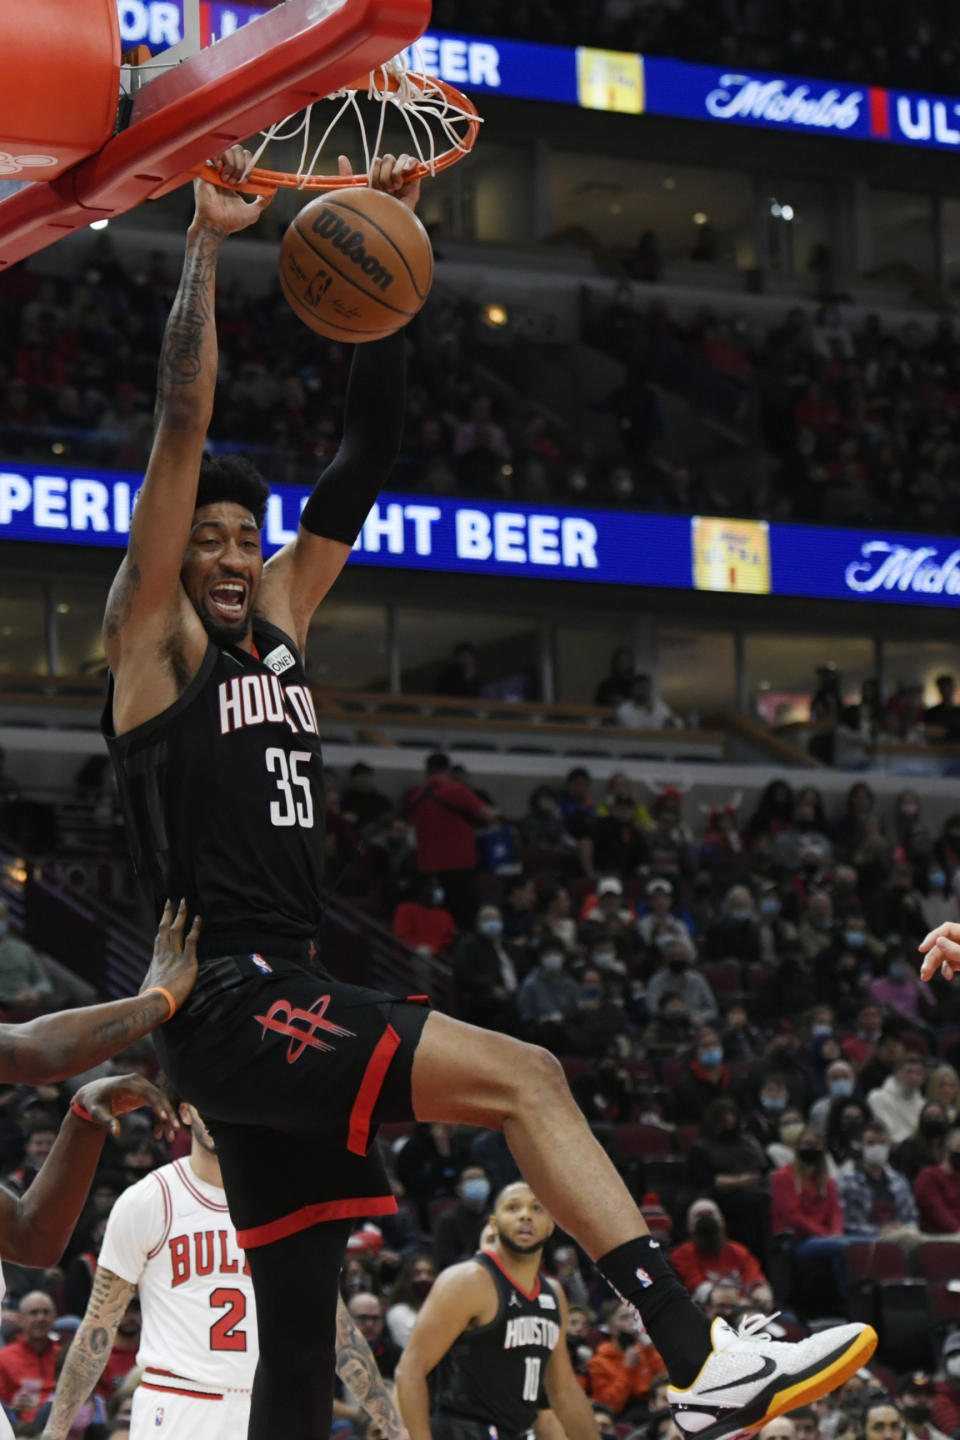 Houston Rockets center Christian Wood (35) dunks against Chicago Bulls forward Javonte Green during the first half of an NBA basketball game Monday, Dec. 20, 2021, in Chicago. (AP Photo/Paul Beaty)